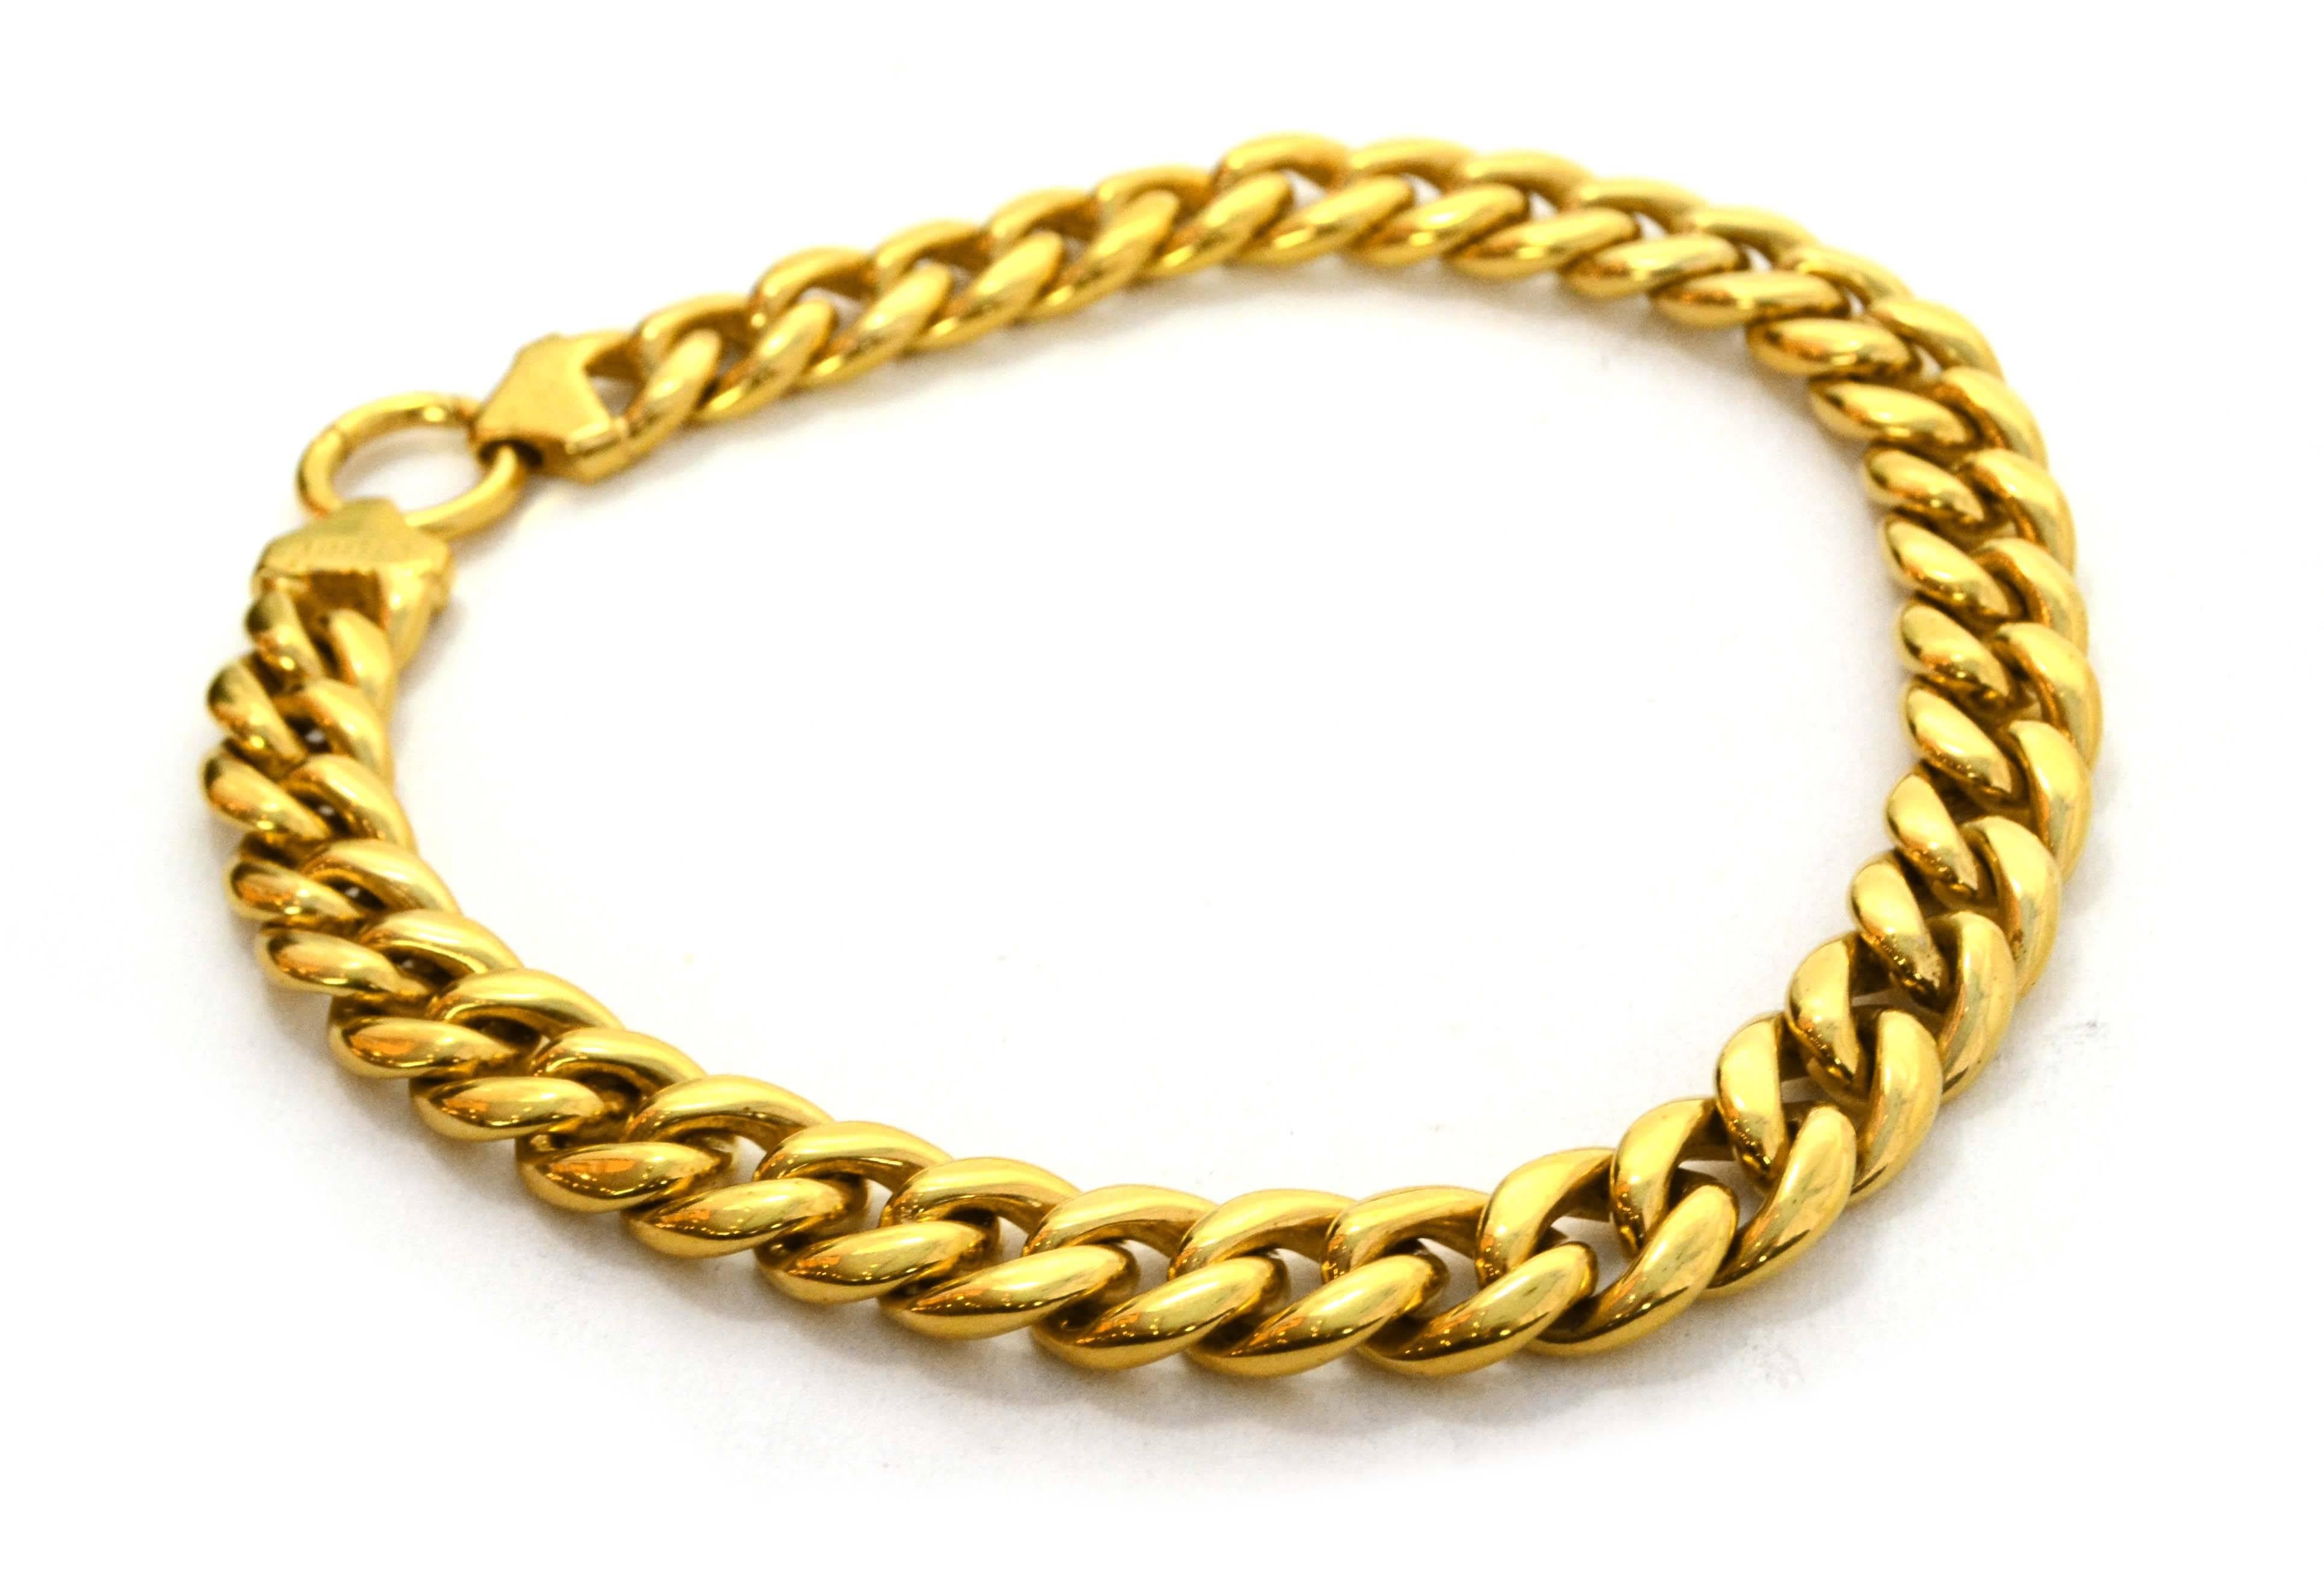 Celine Gold Curb Chain Link Choker
Made In: Italy
Color: Goldtone
Materials: Metal
Closure: Push lever jump ring
Stamp: Celine Made in Italy M
Retail Price: $780 + tax
Overall Condition: Excellent pre-owned condition with the exception of